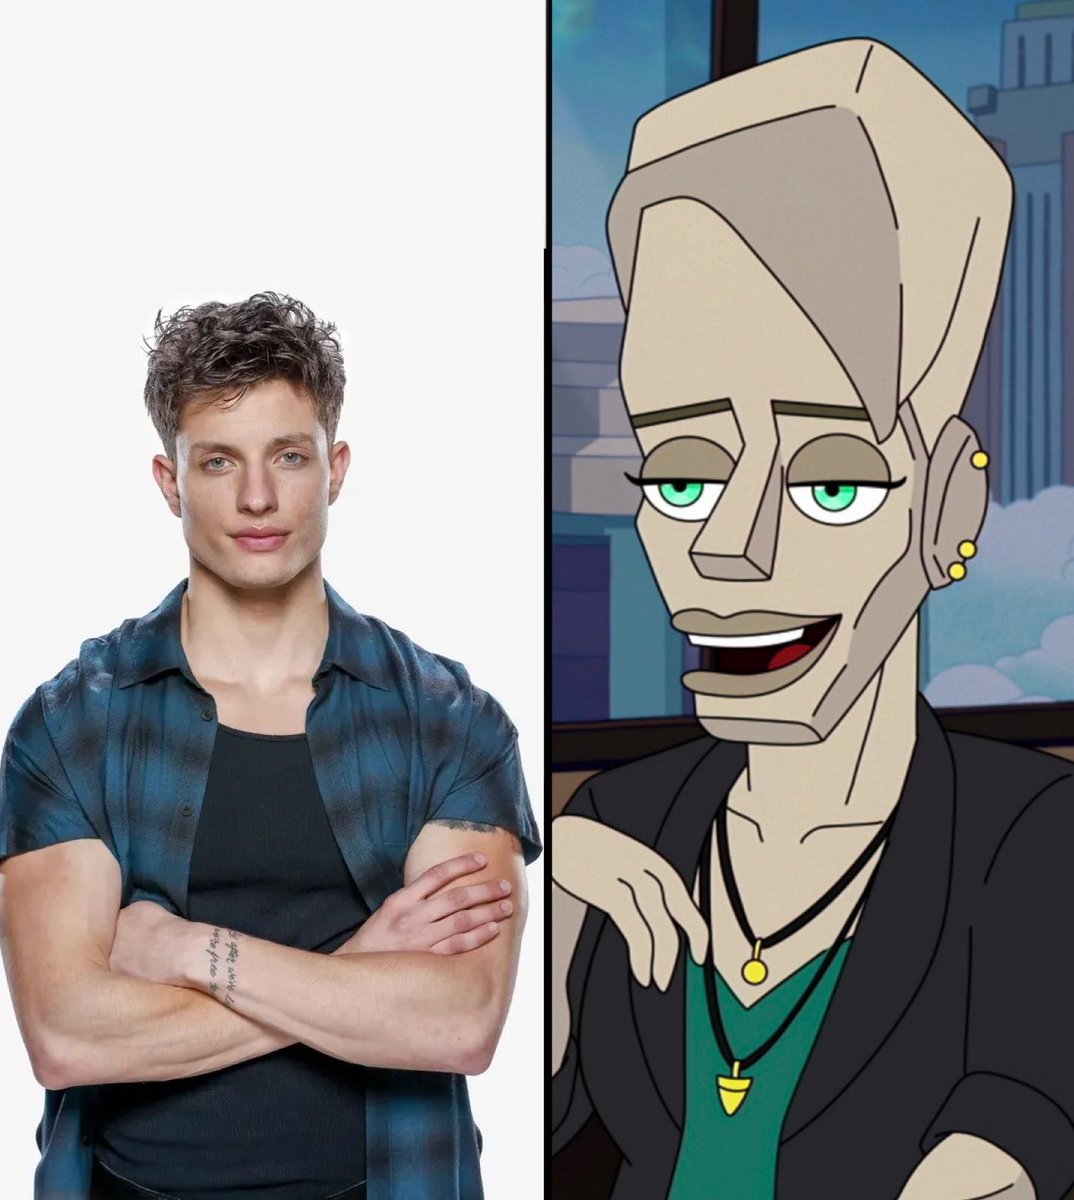 @mattrife @nickkroll I can’t be the only one that sees this connection